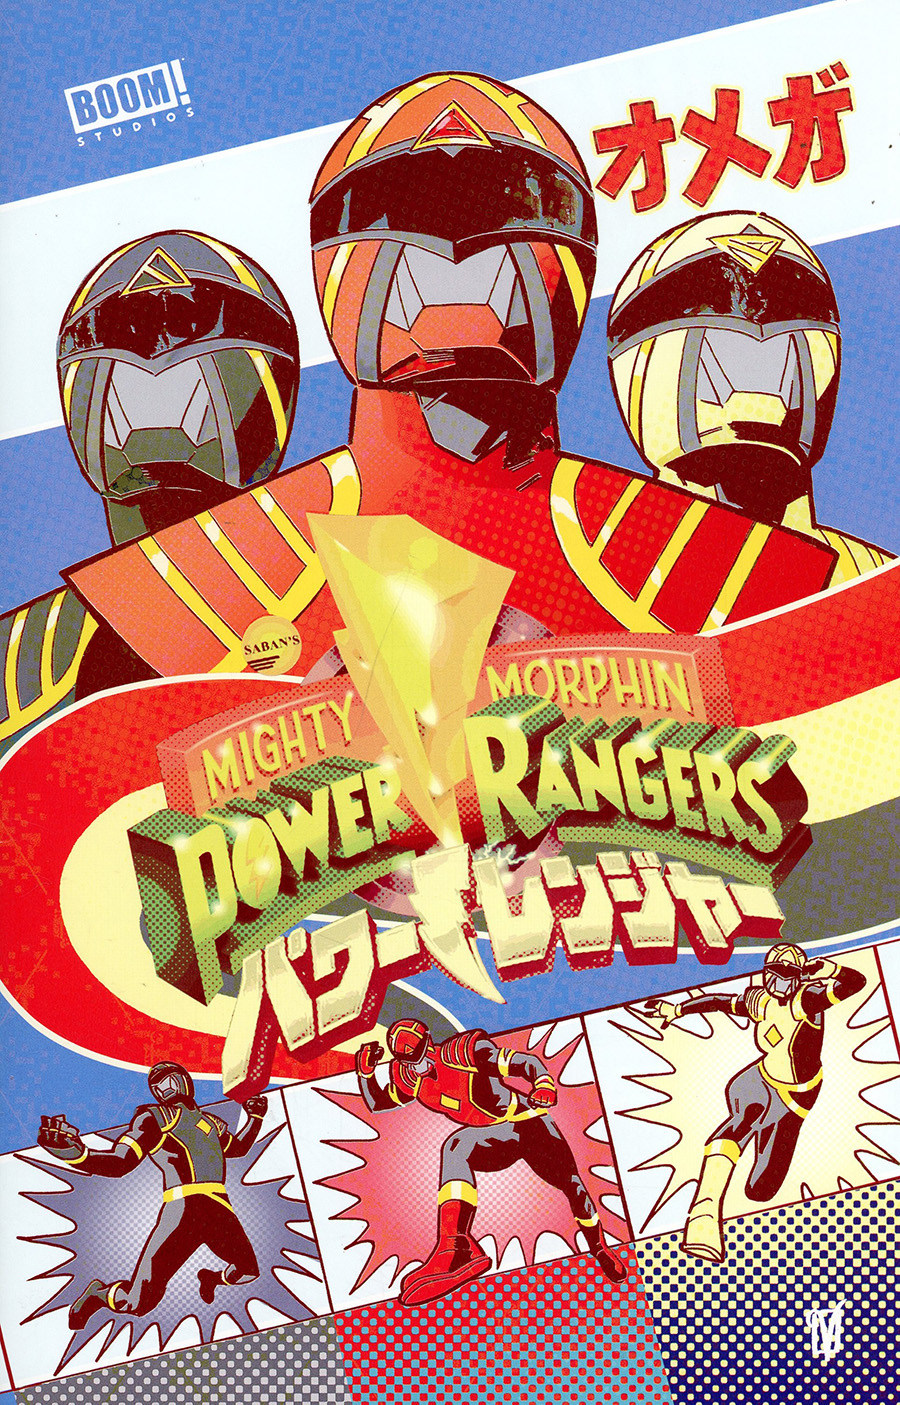 Power Rangers #15 Cover G Incentive Valentine de Landro Reveal Variant Cover (The Eltarian War Part 6)